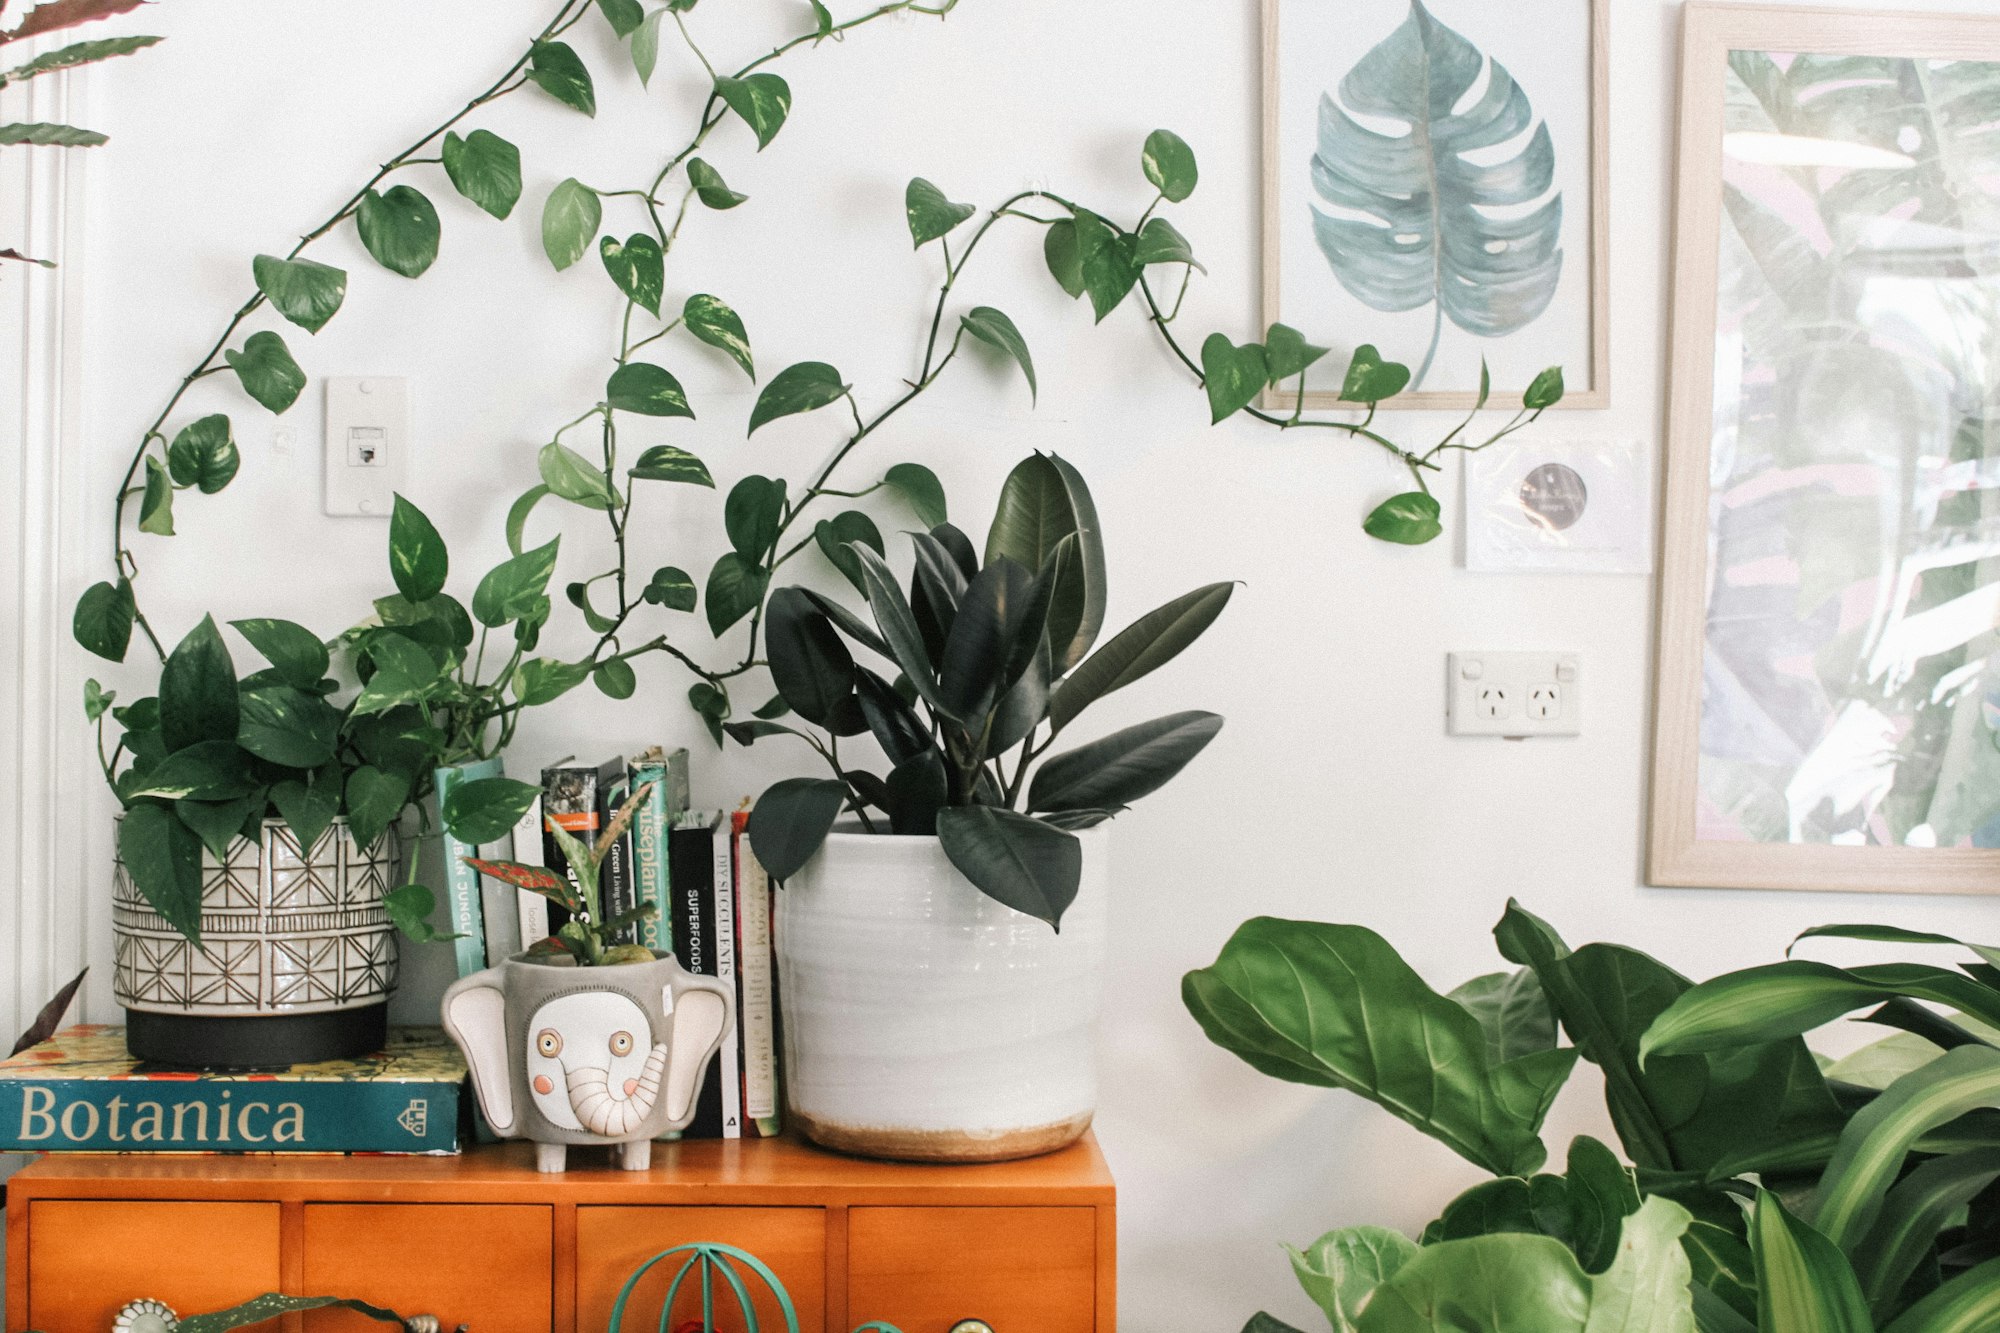 SDG 13: Climate Action and SDG 15: Life on Land: Plants bring life to workplace, improves aesthetics, and helps in promoting SDG 13 and SDG 15. Photo by Prudence Earl / Unsplash